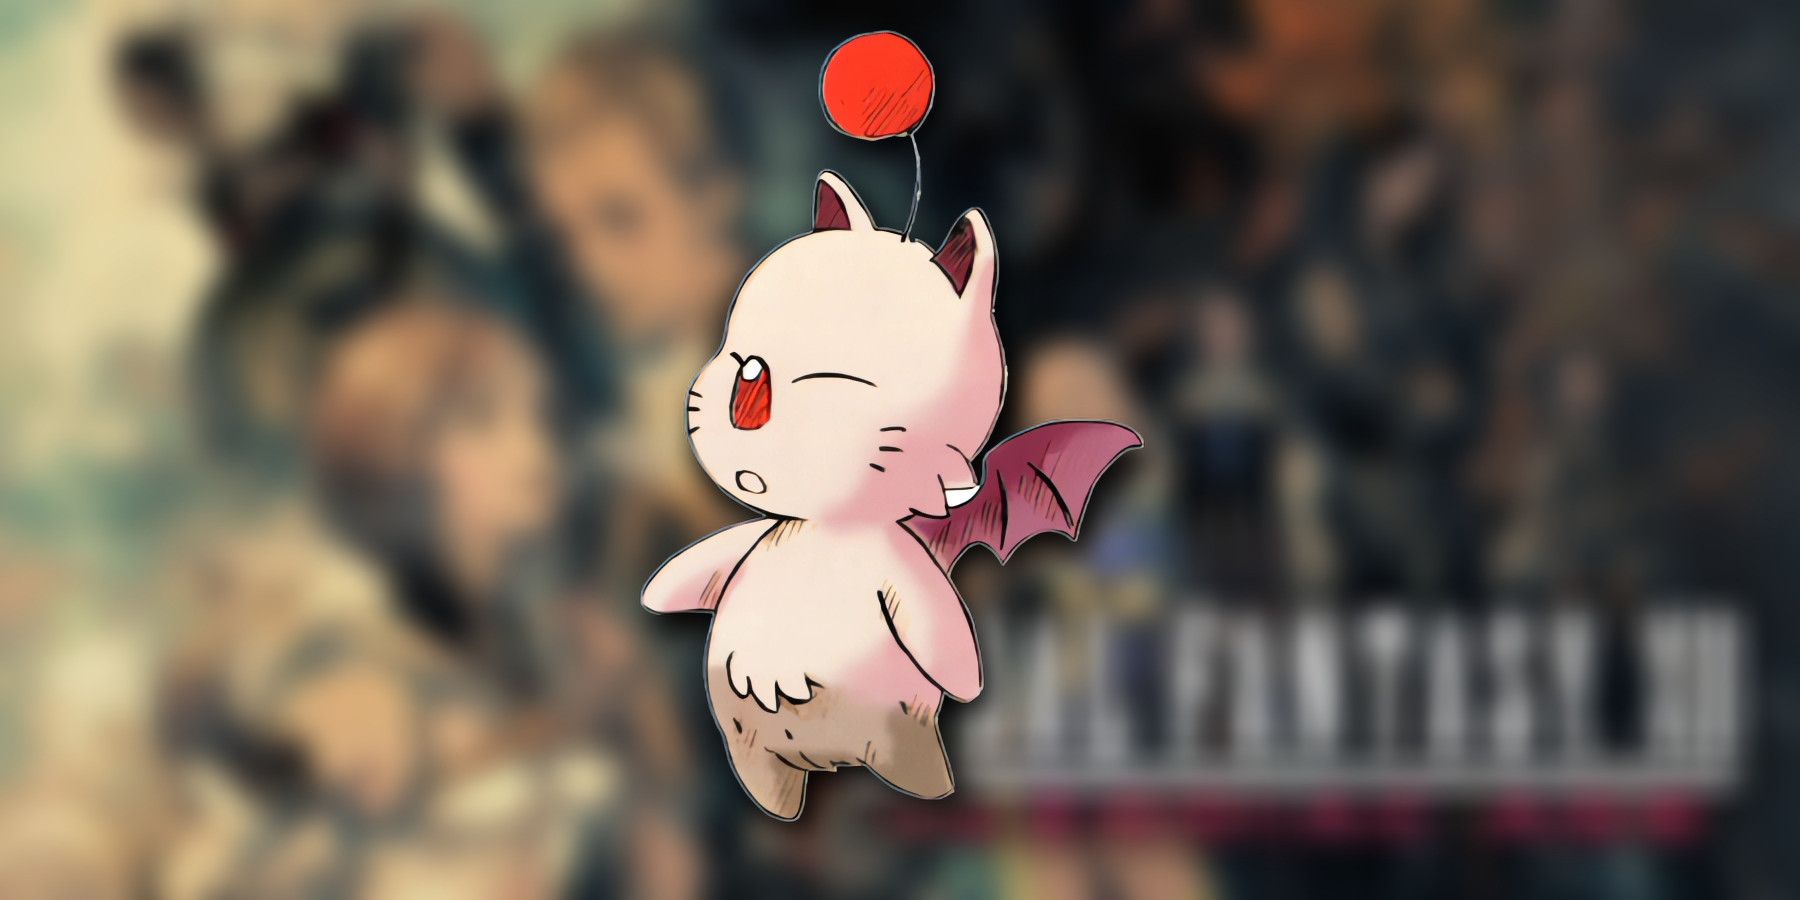 final fantasy moogle with blurred final fantasy 12 cover art background